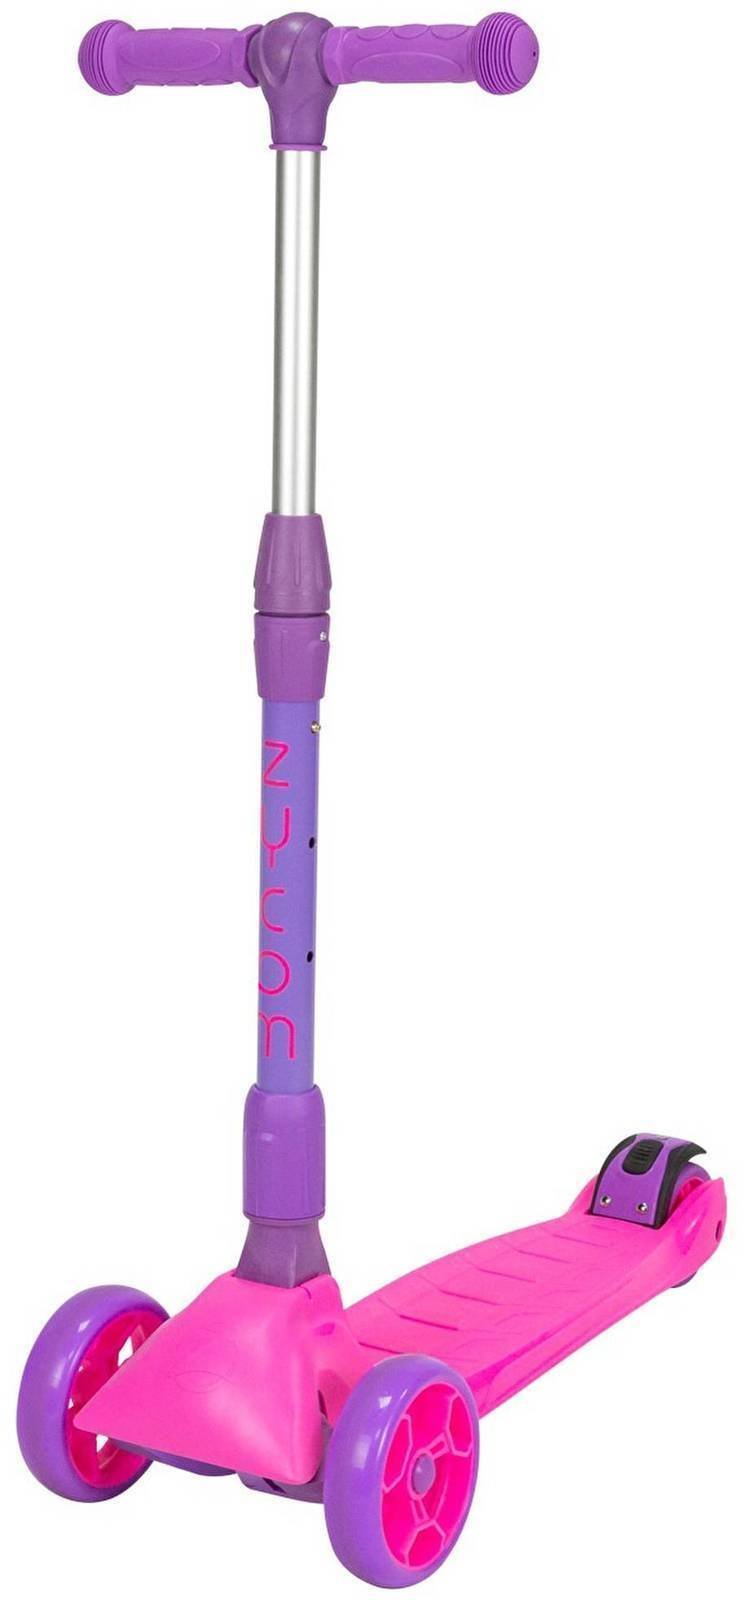 Kid Scooter / Tricycle Zycom Scooter Zinger Pink/Purple Kid Scooter / Tricycle